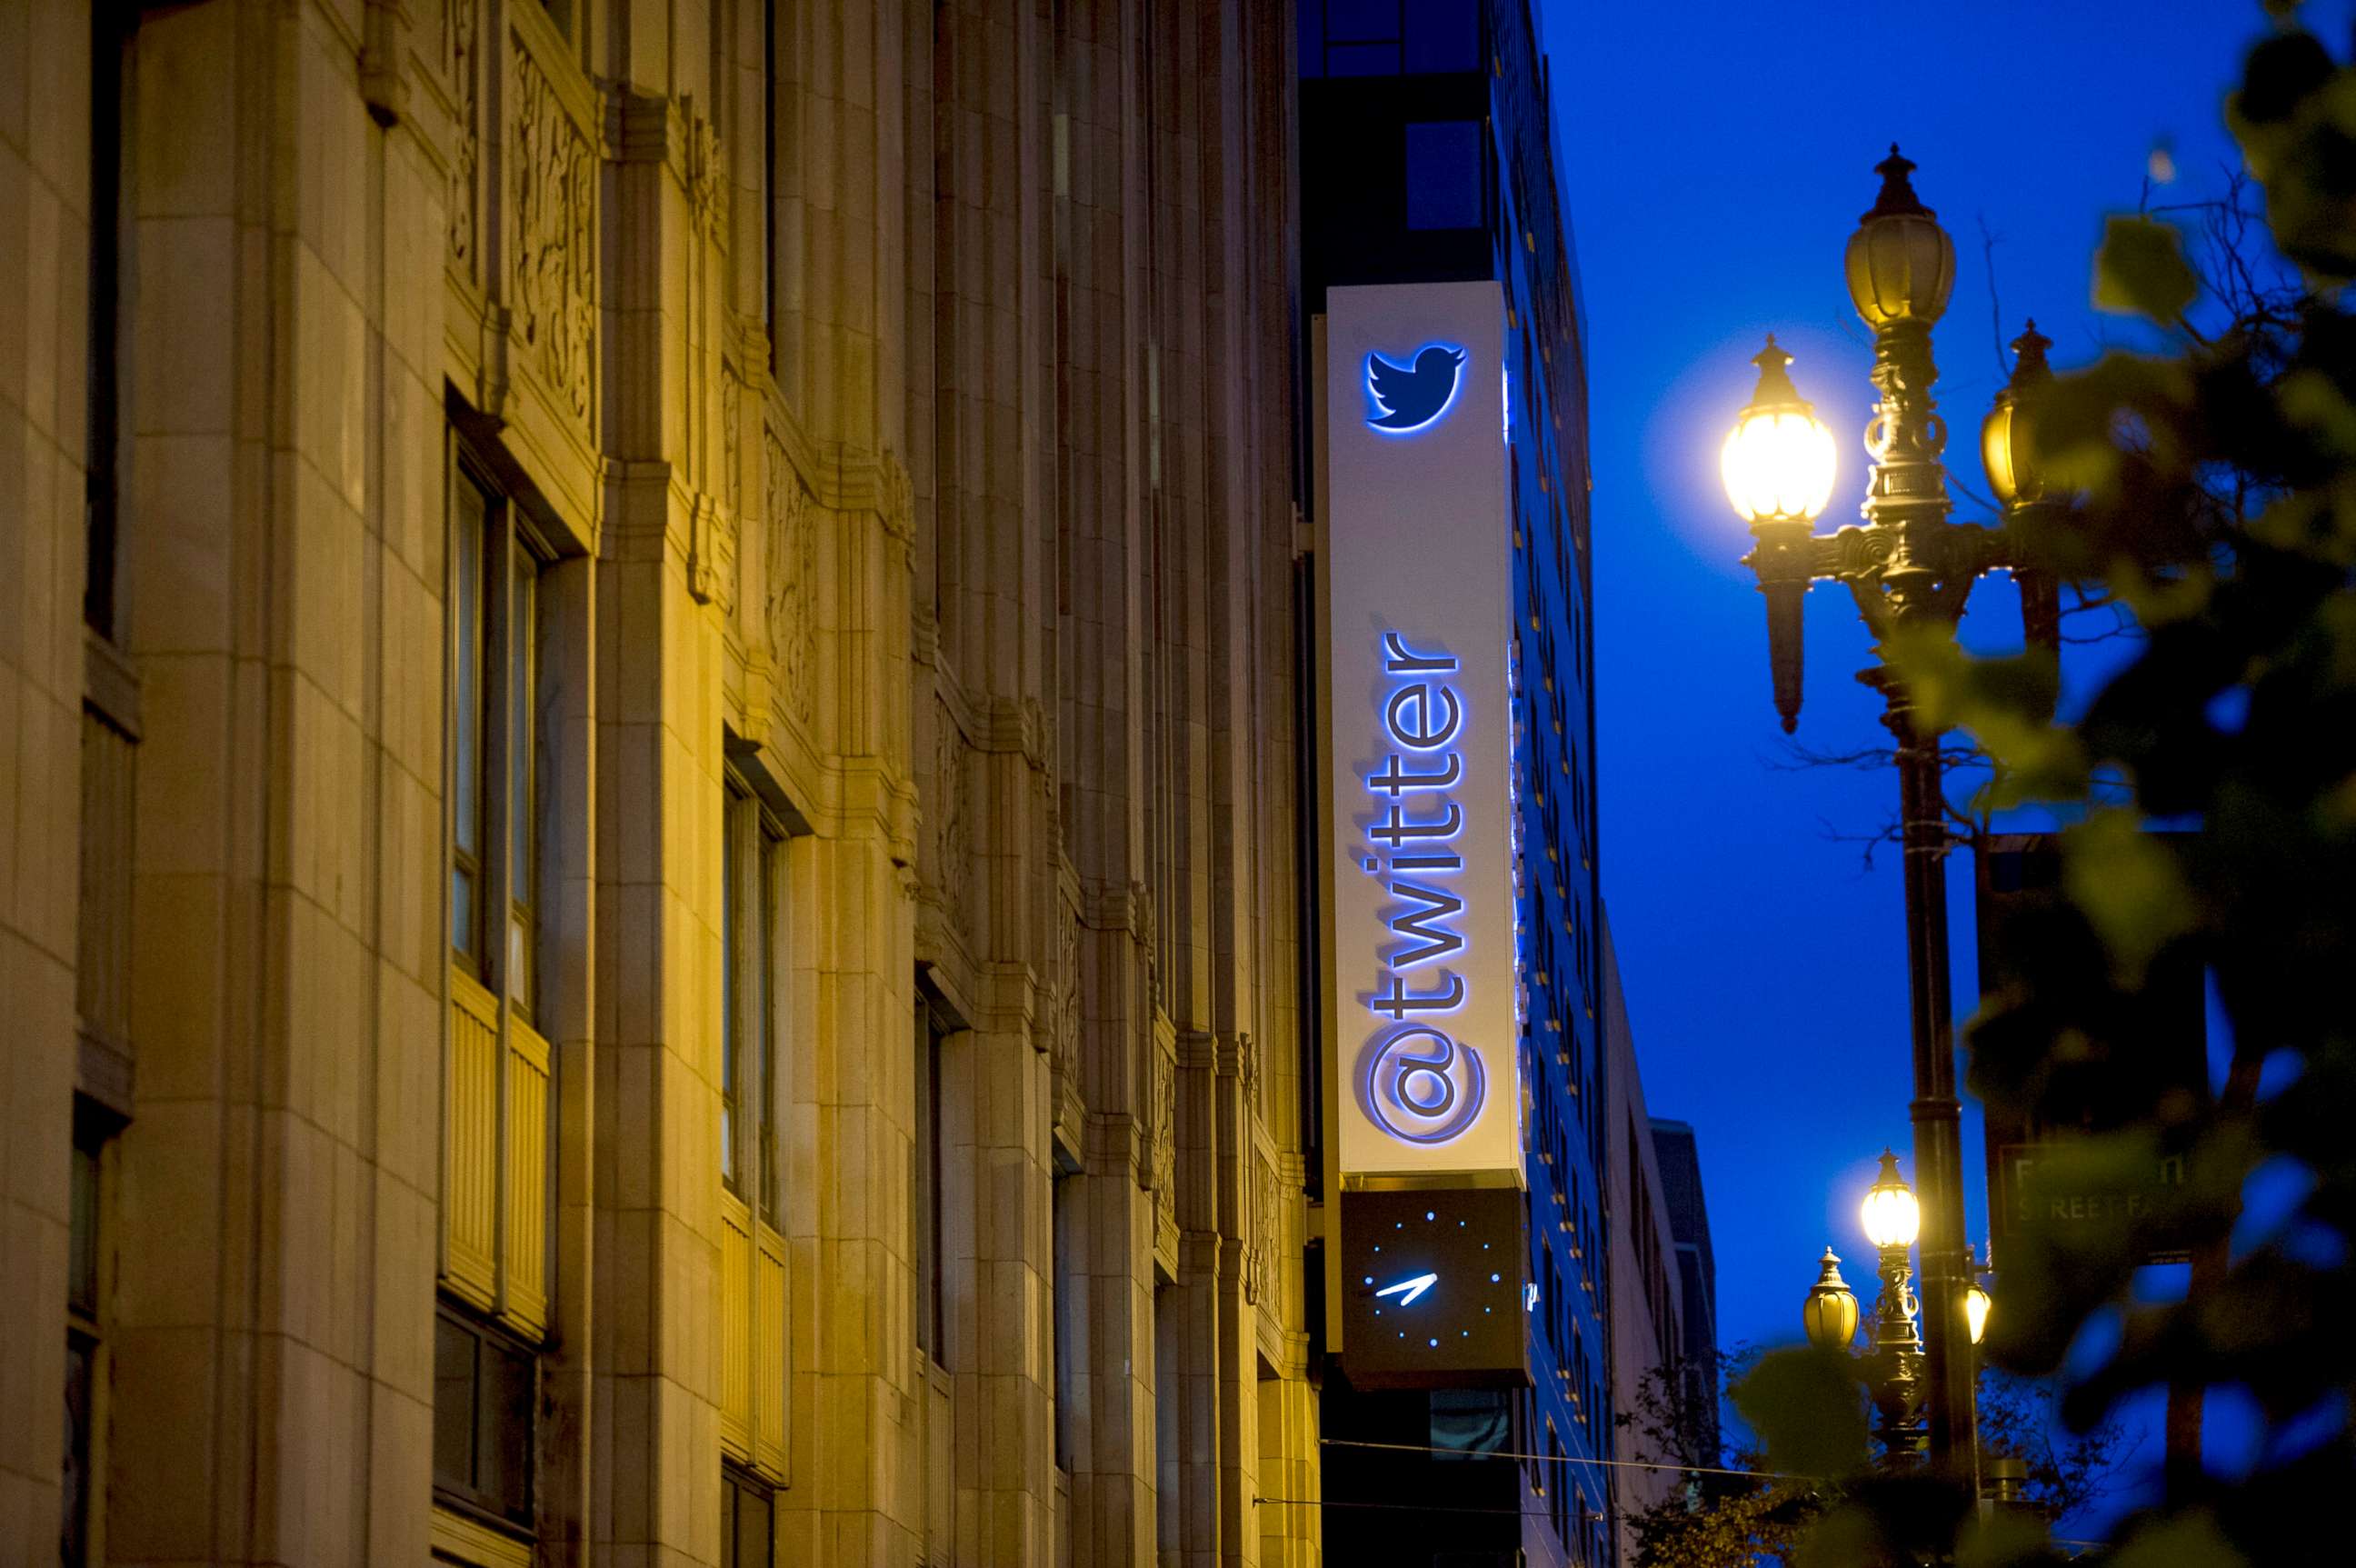 PHOTO: In this Sept. 13, 2013, file photo, the Twitter Inc. logo and signage is displayed on the facade of the company's headquarters in San Francisco.